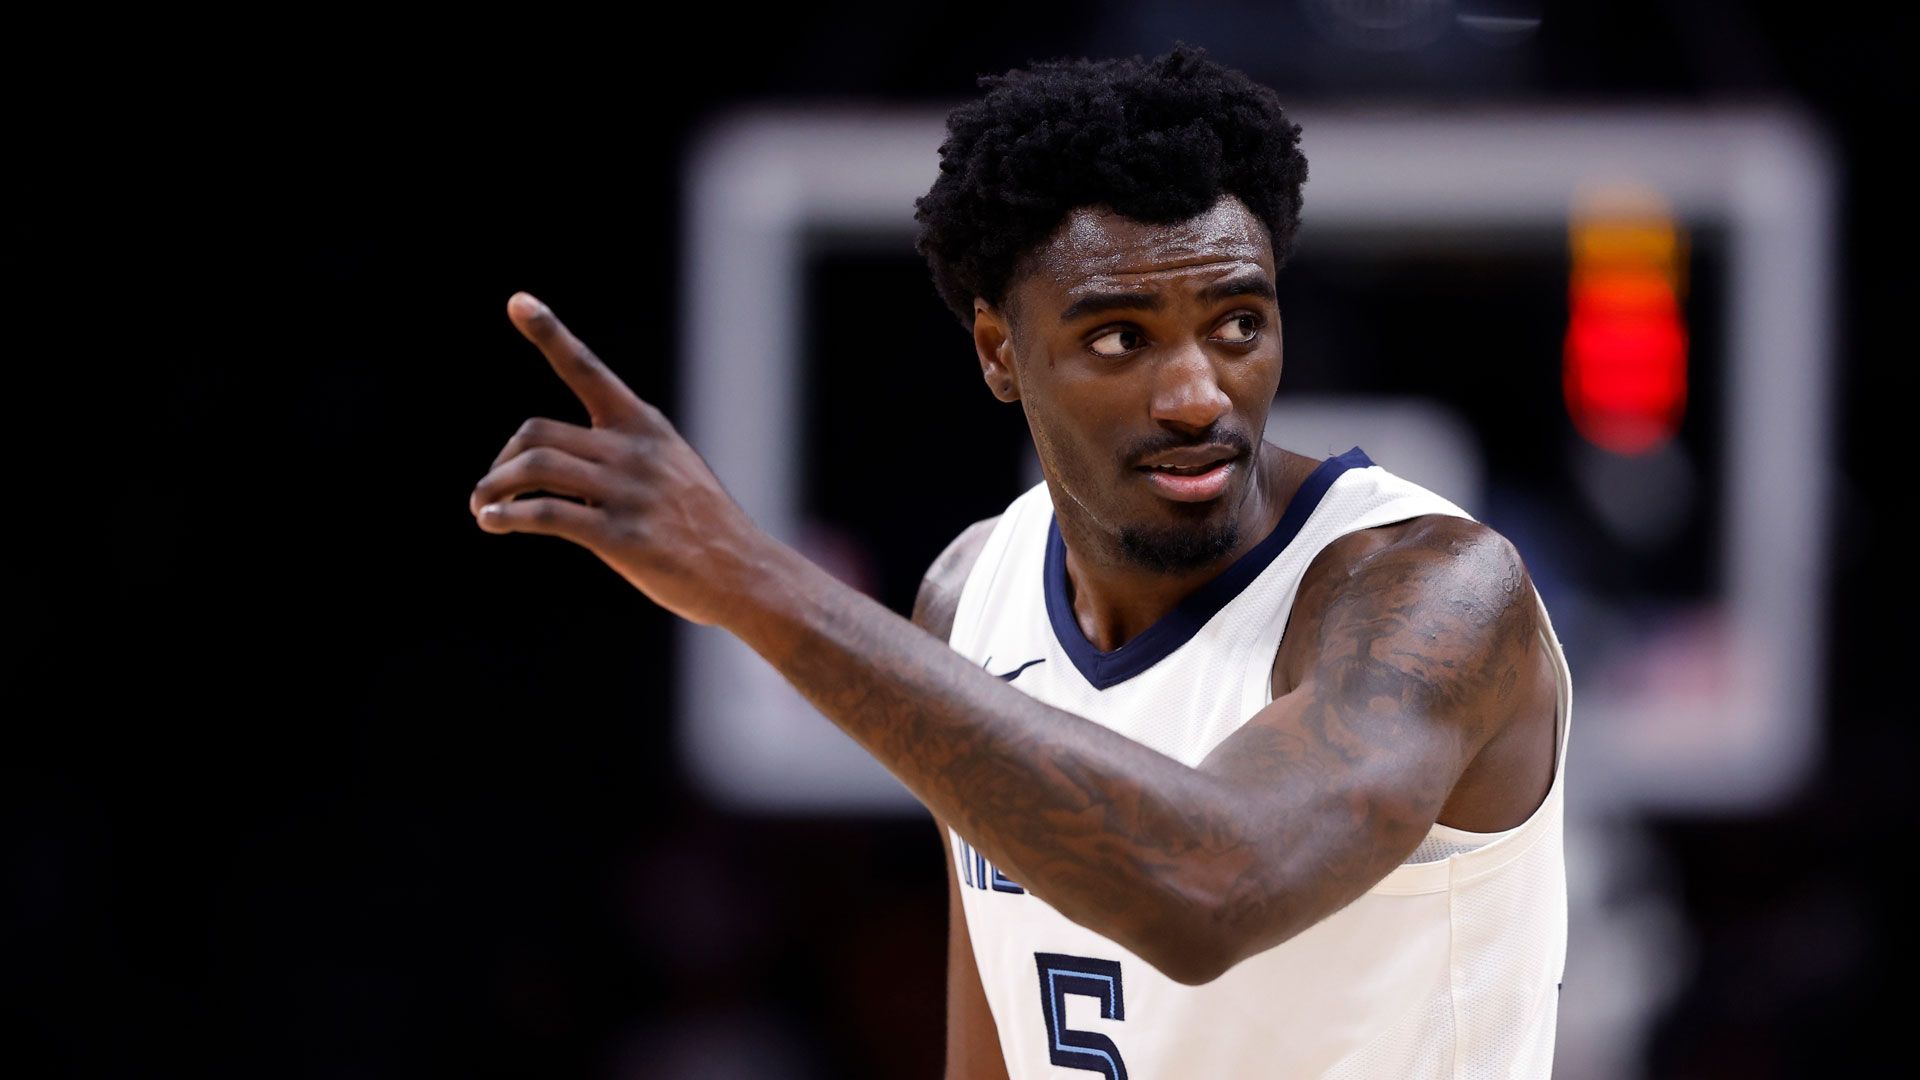 MikeCheck: Williams brings ‘workers hat’ mentality to rep Grizzlies among NBA’s Rising Stars